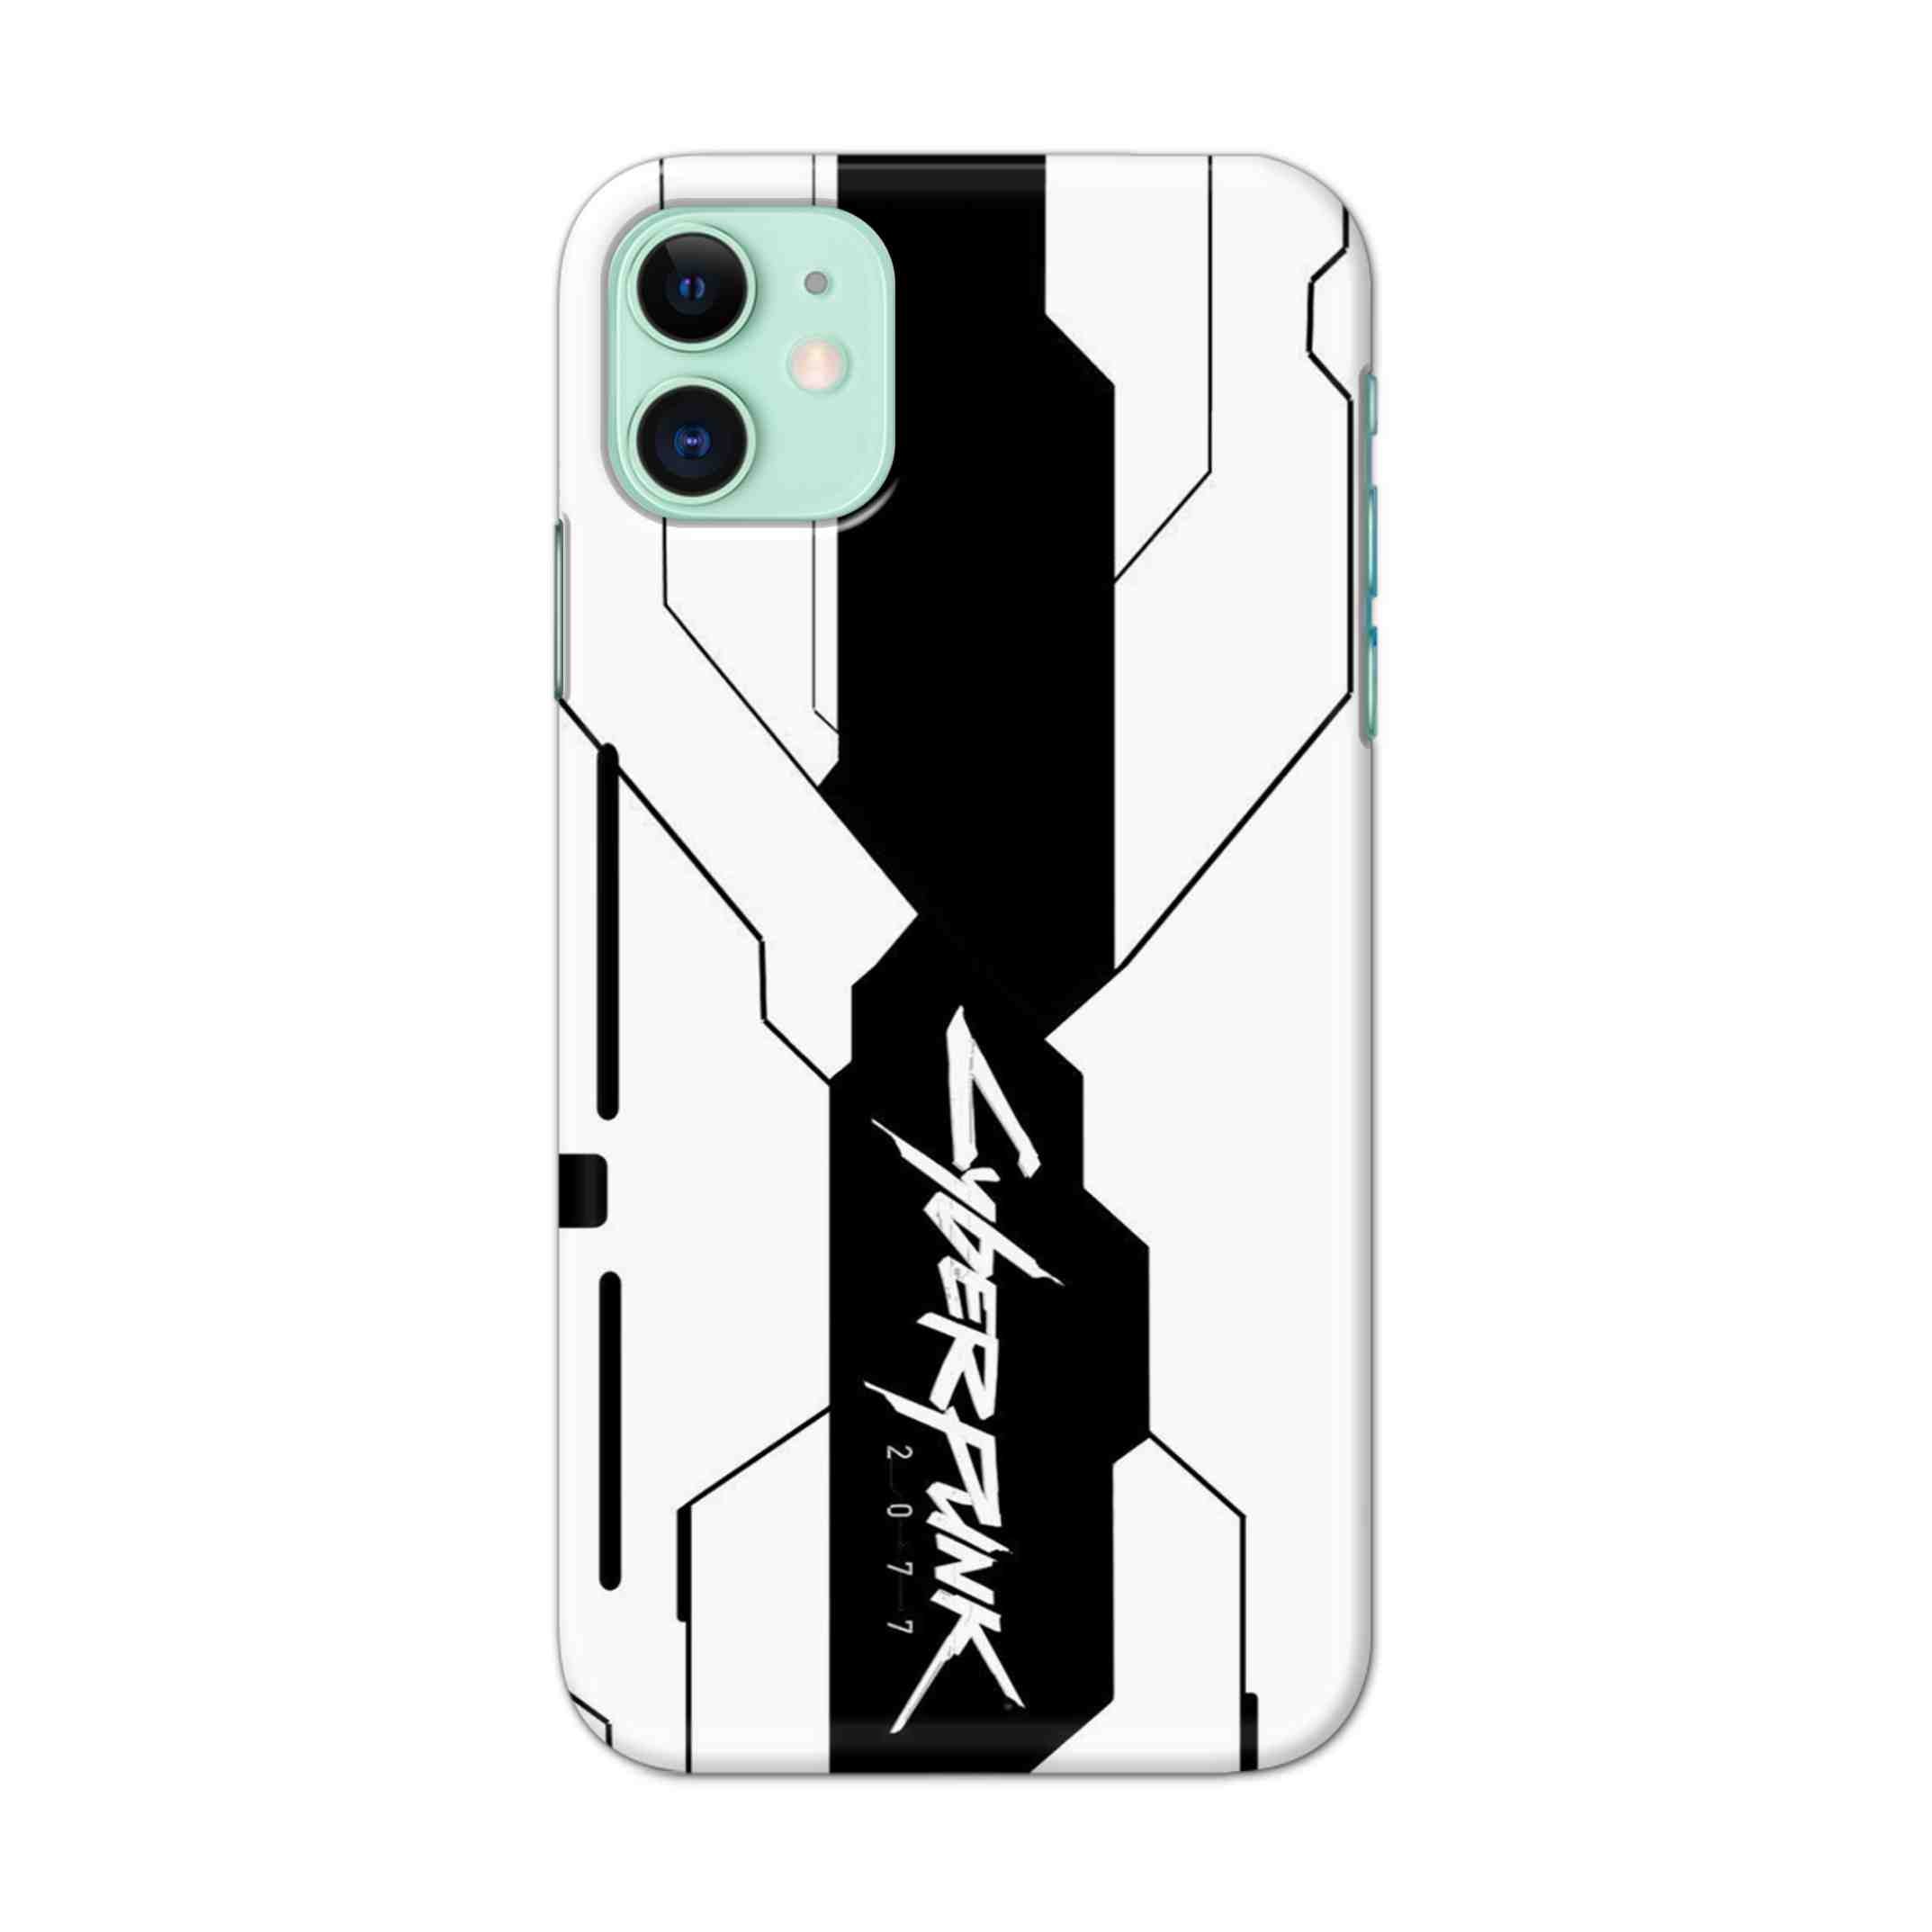 Buy Cyberpunk 2077 Hard Back Mobile Phone Case/Cover For iPhone 11 Online